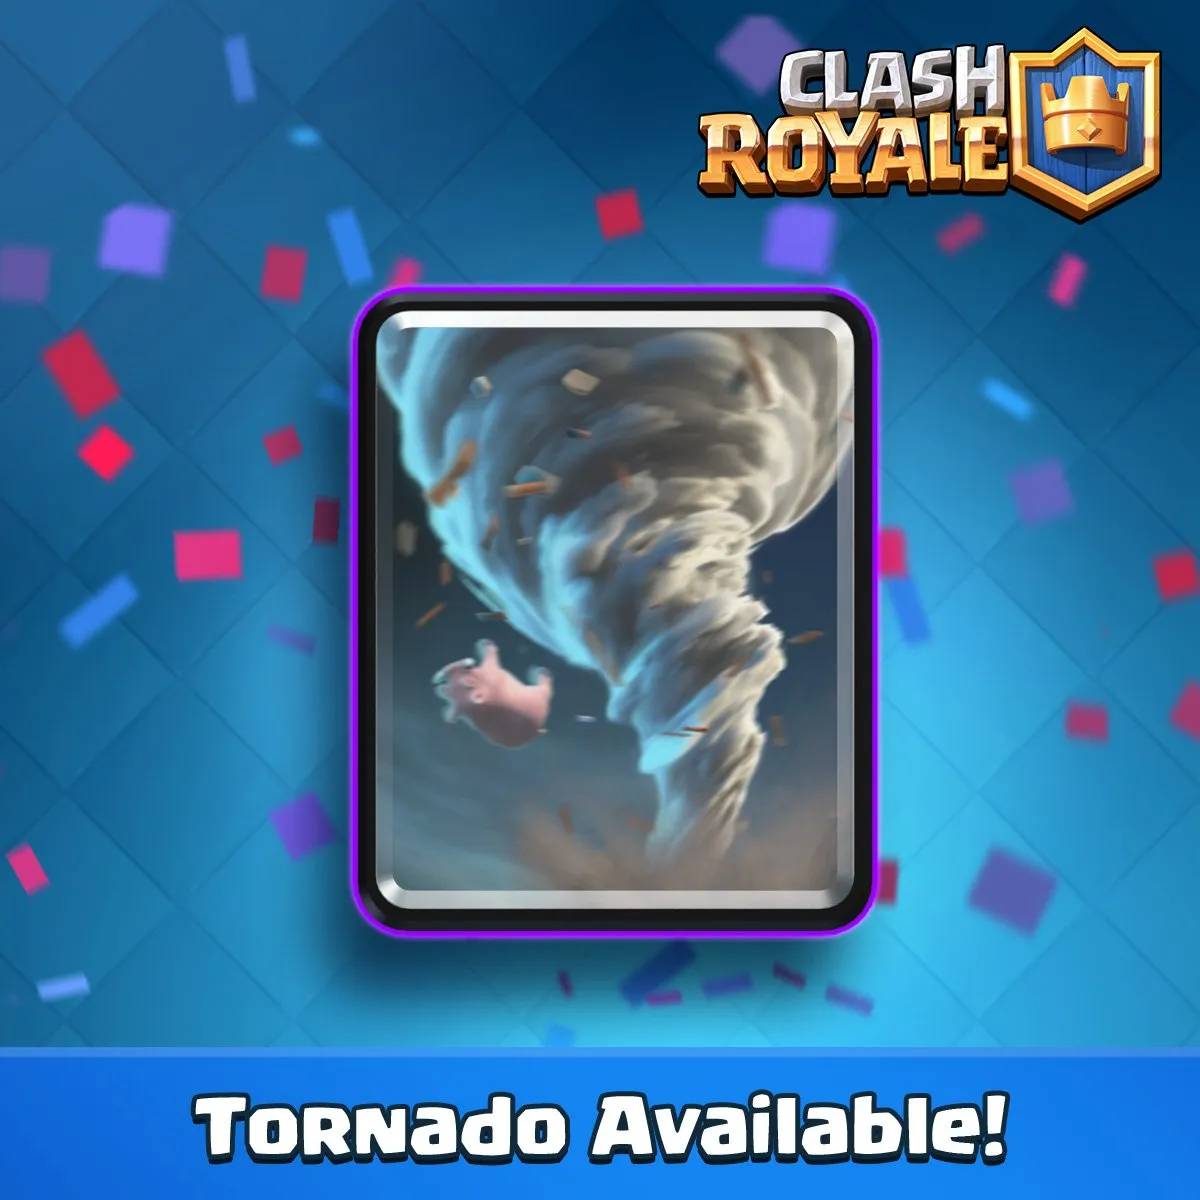 What Does the Tornado Do in Clash Royale